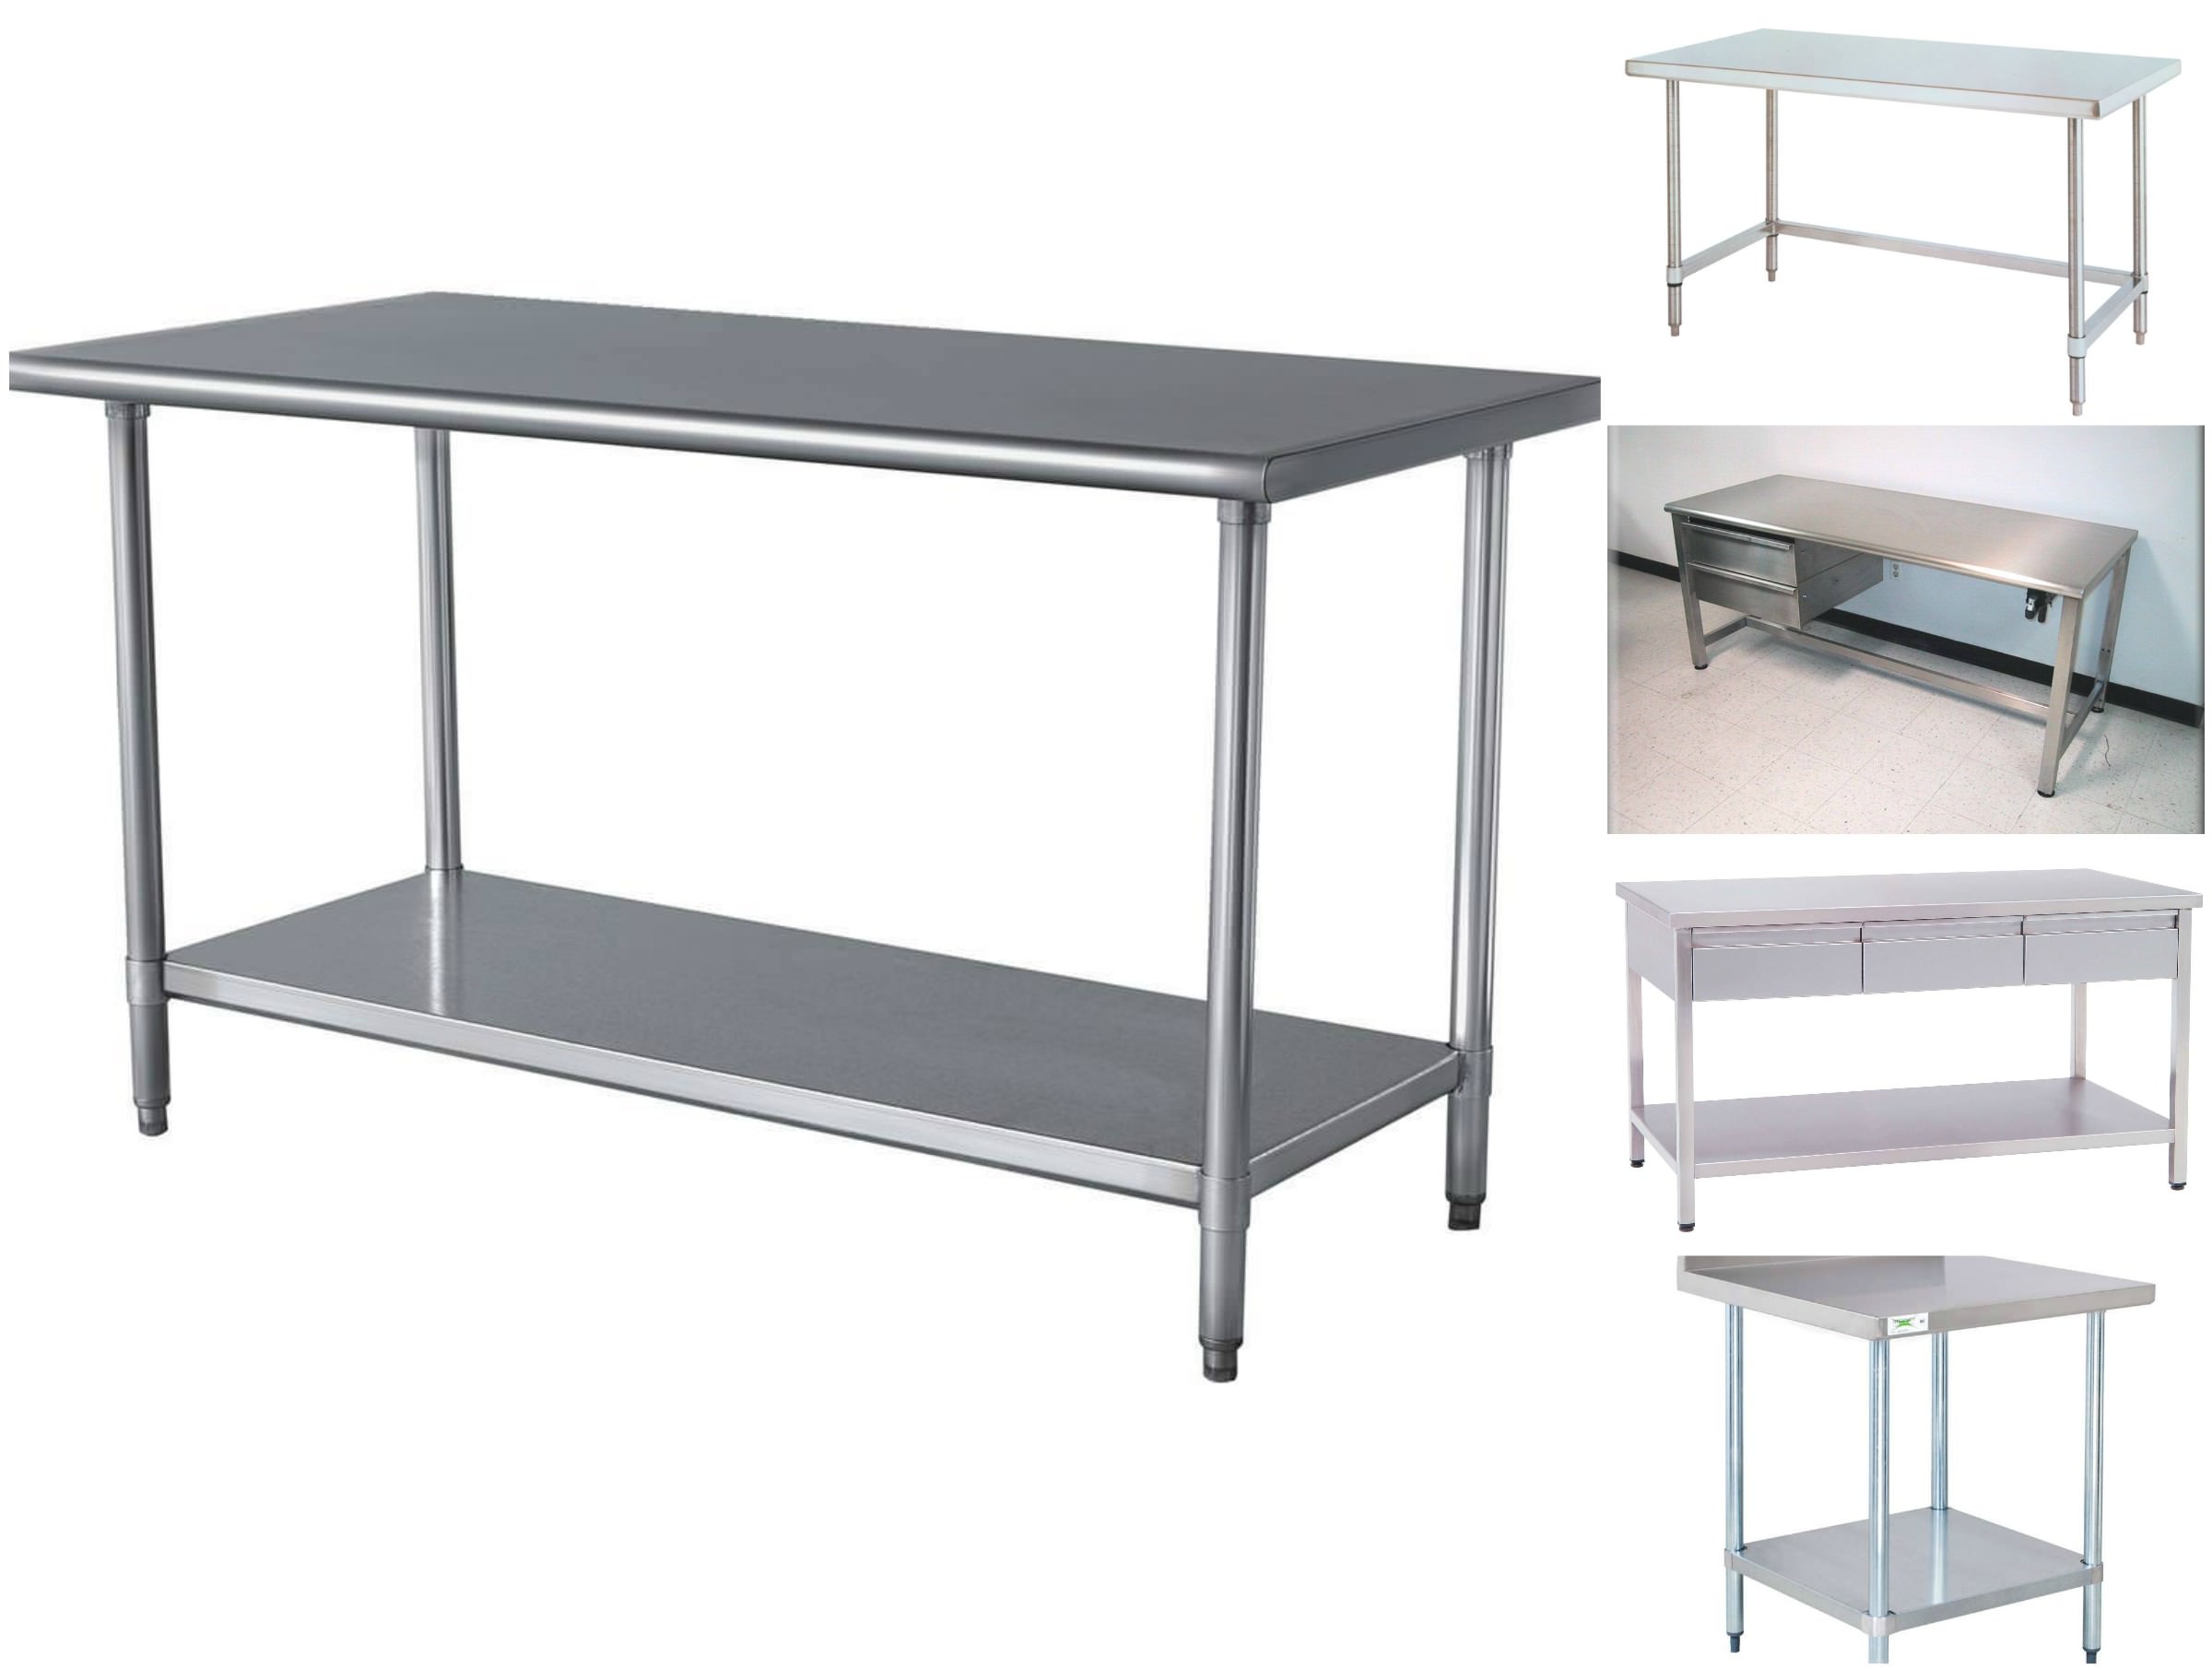 Image of: Stainless Steel Work Tables